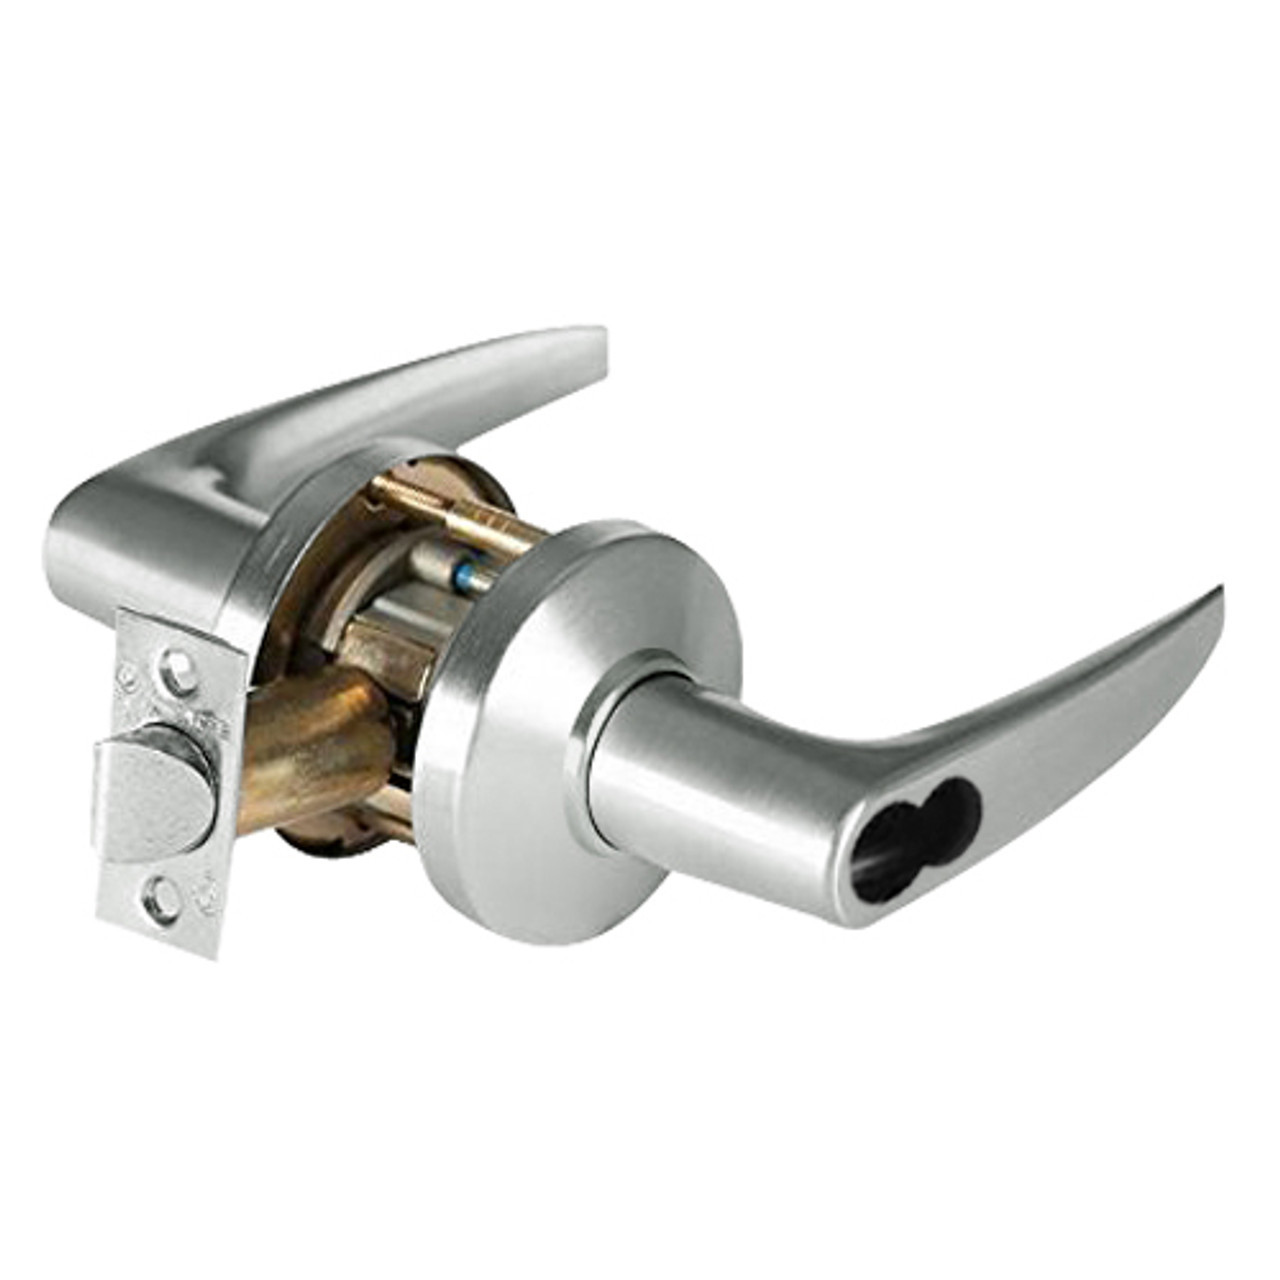 9K37XD16CSTK618LM Best 9K Series Special Function Cylindrical Lever Locks with Curved without Return Lever Design Accept 7 Pin Best Core in Bright Nickel